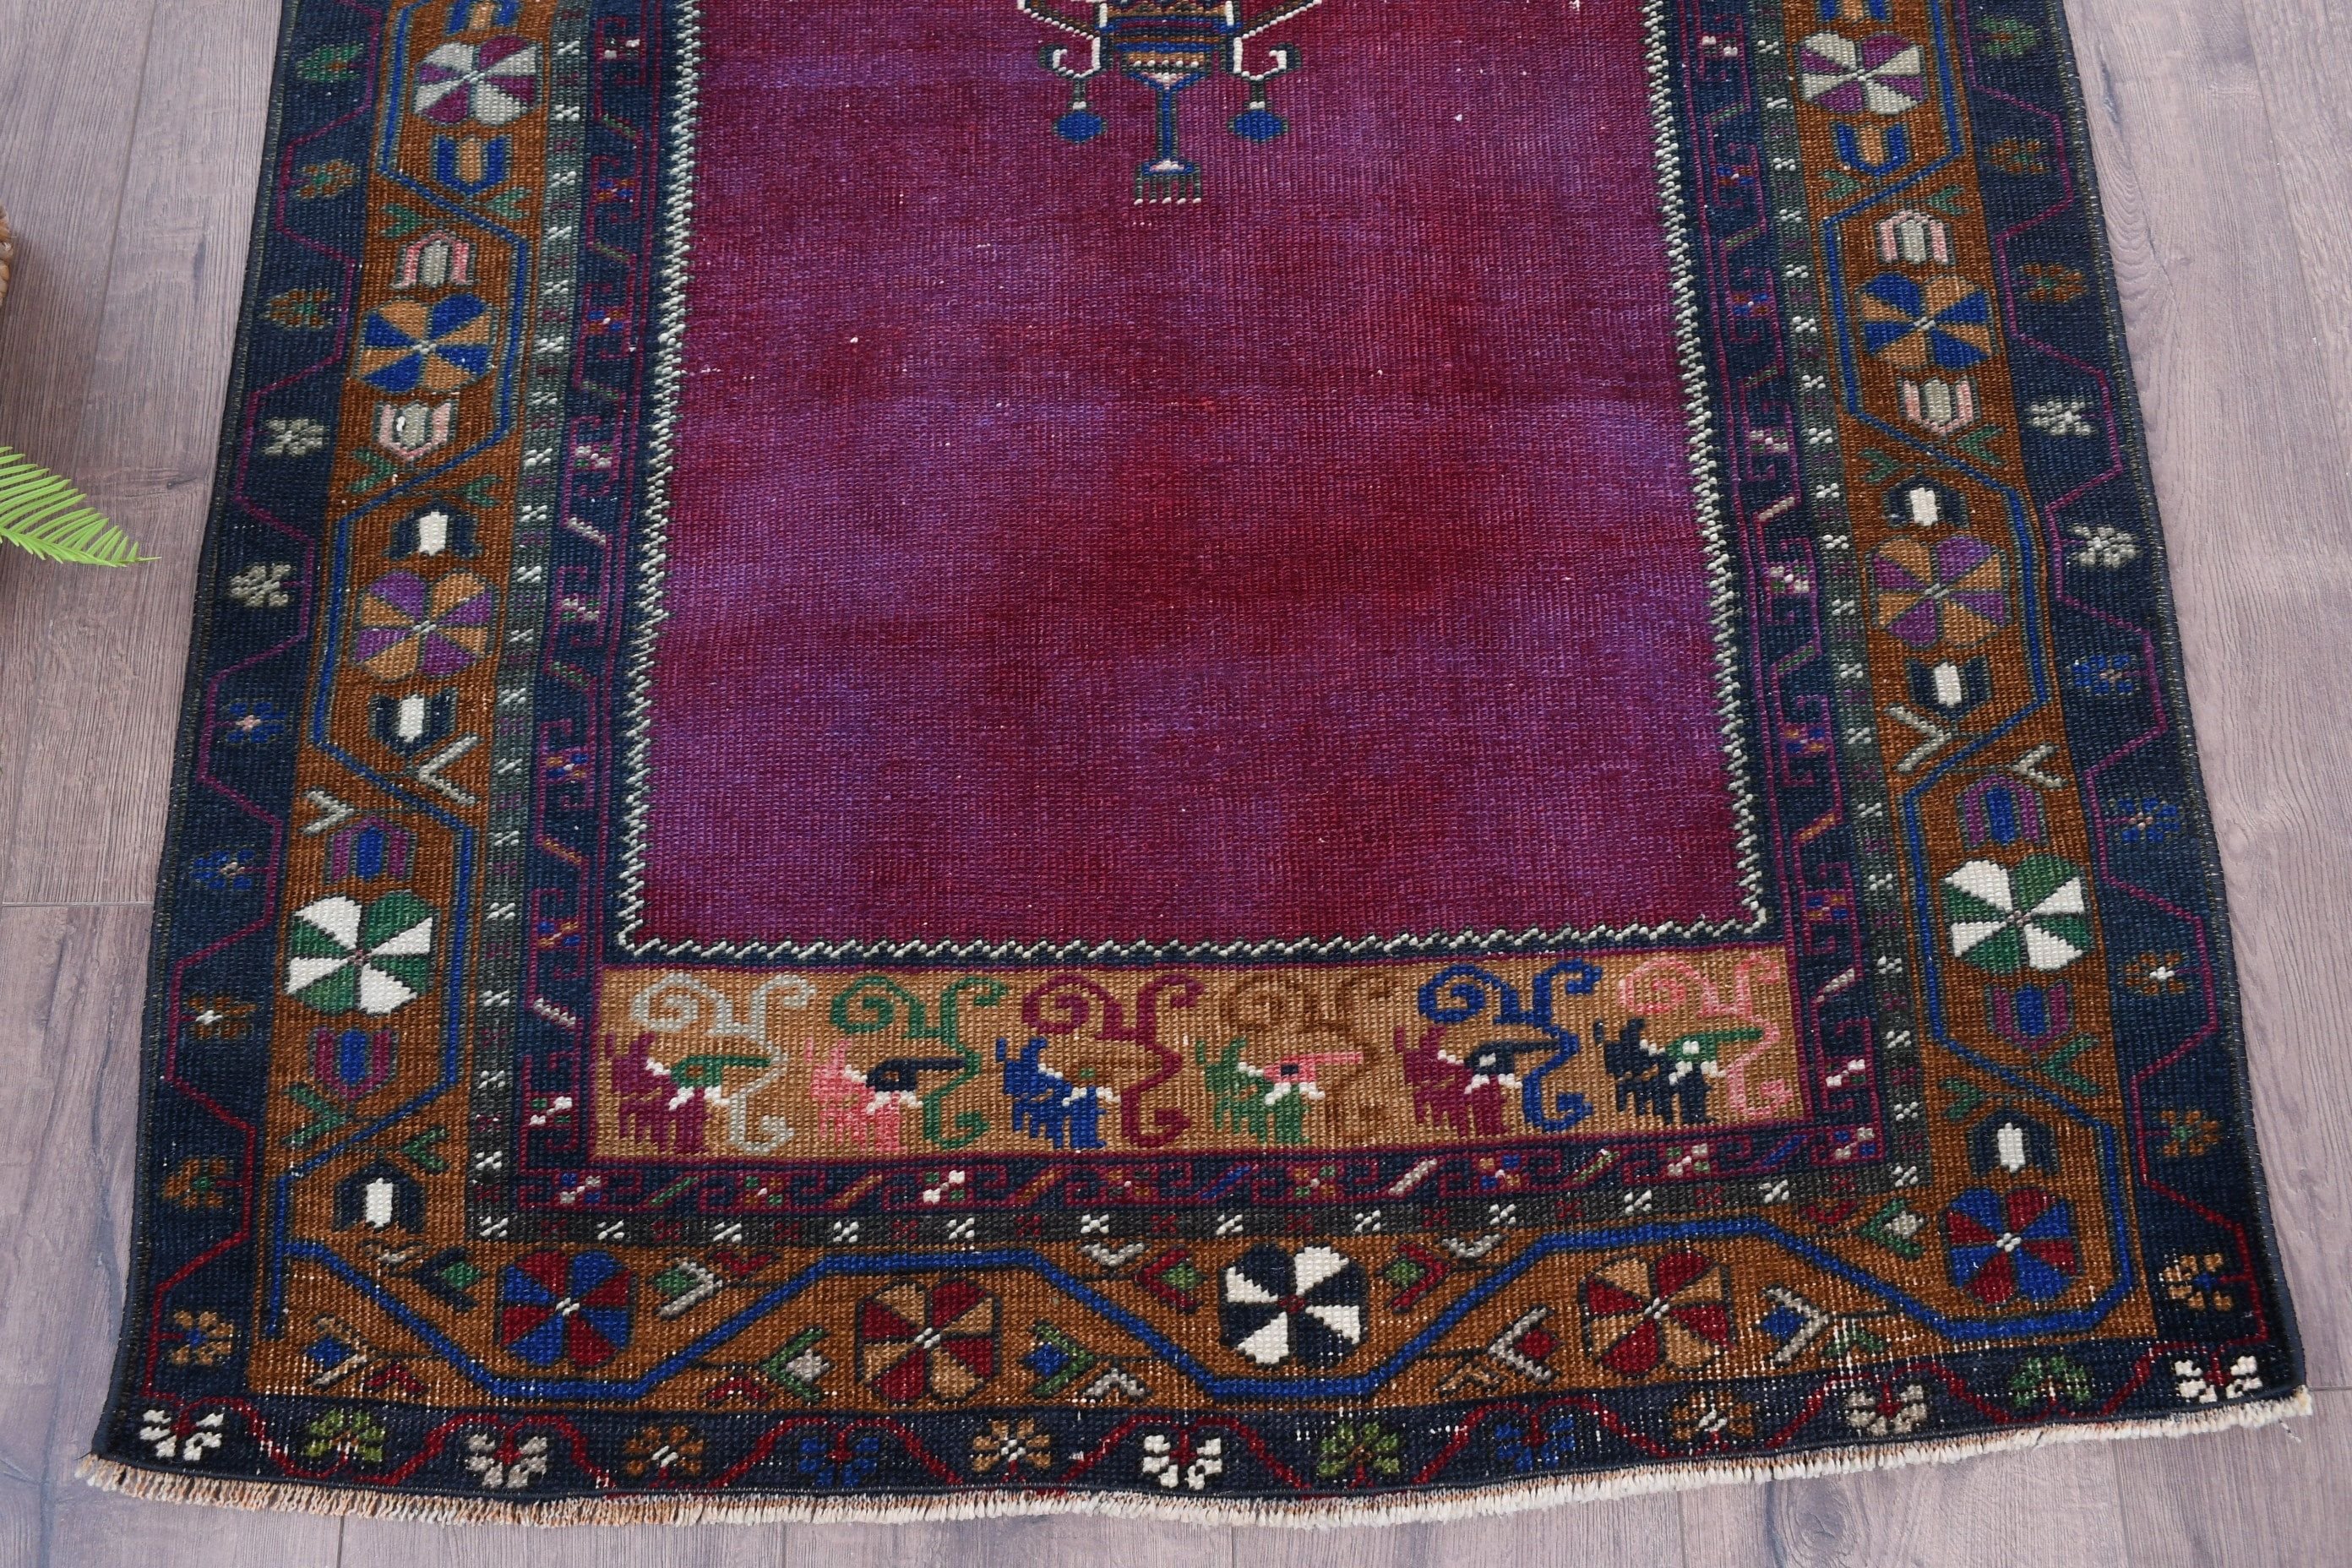 Turkish Rugs, Rugs for Entry, Kitchen Rug, Bedroom Rugs, Purple Moroccan Rug, Oriental Rug, Vintage Rugs, 3.1x5.4 ft Accent Rug, Entry Rug